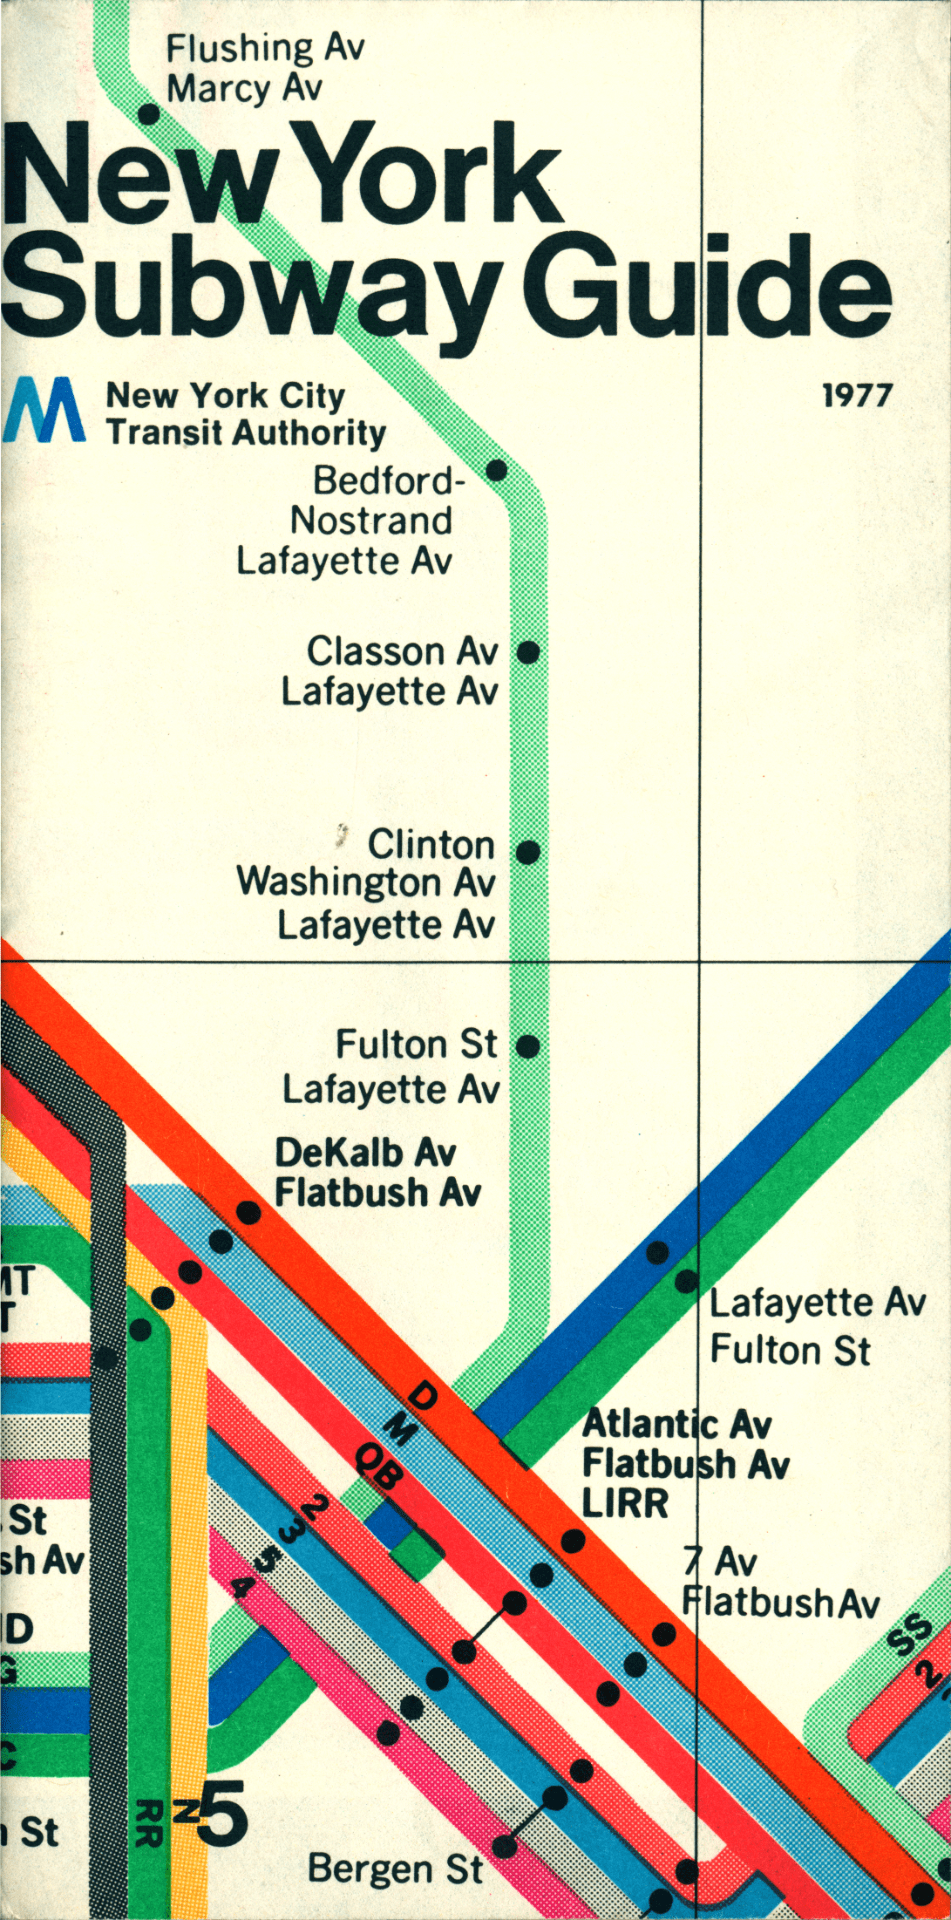 shows a small corner of the new york city subway map